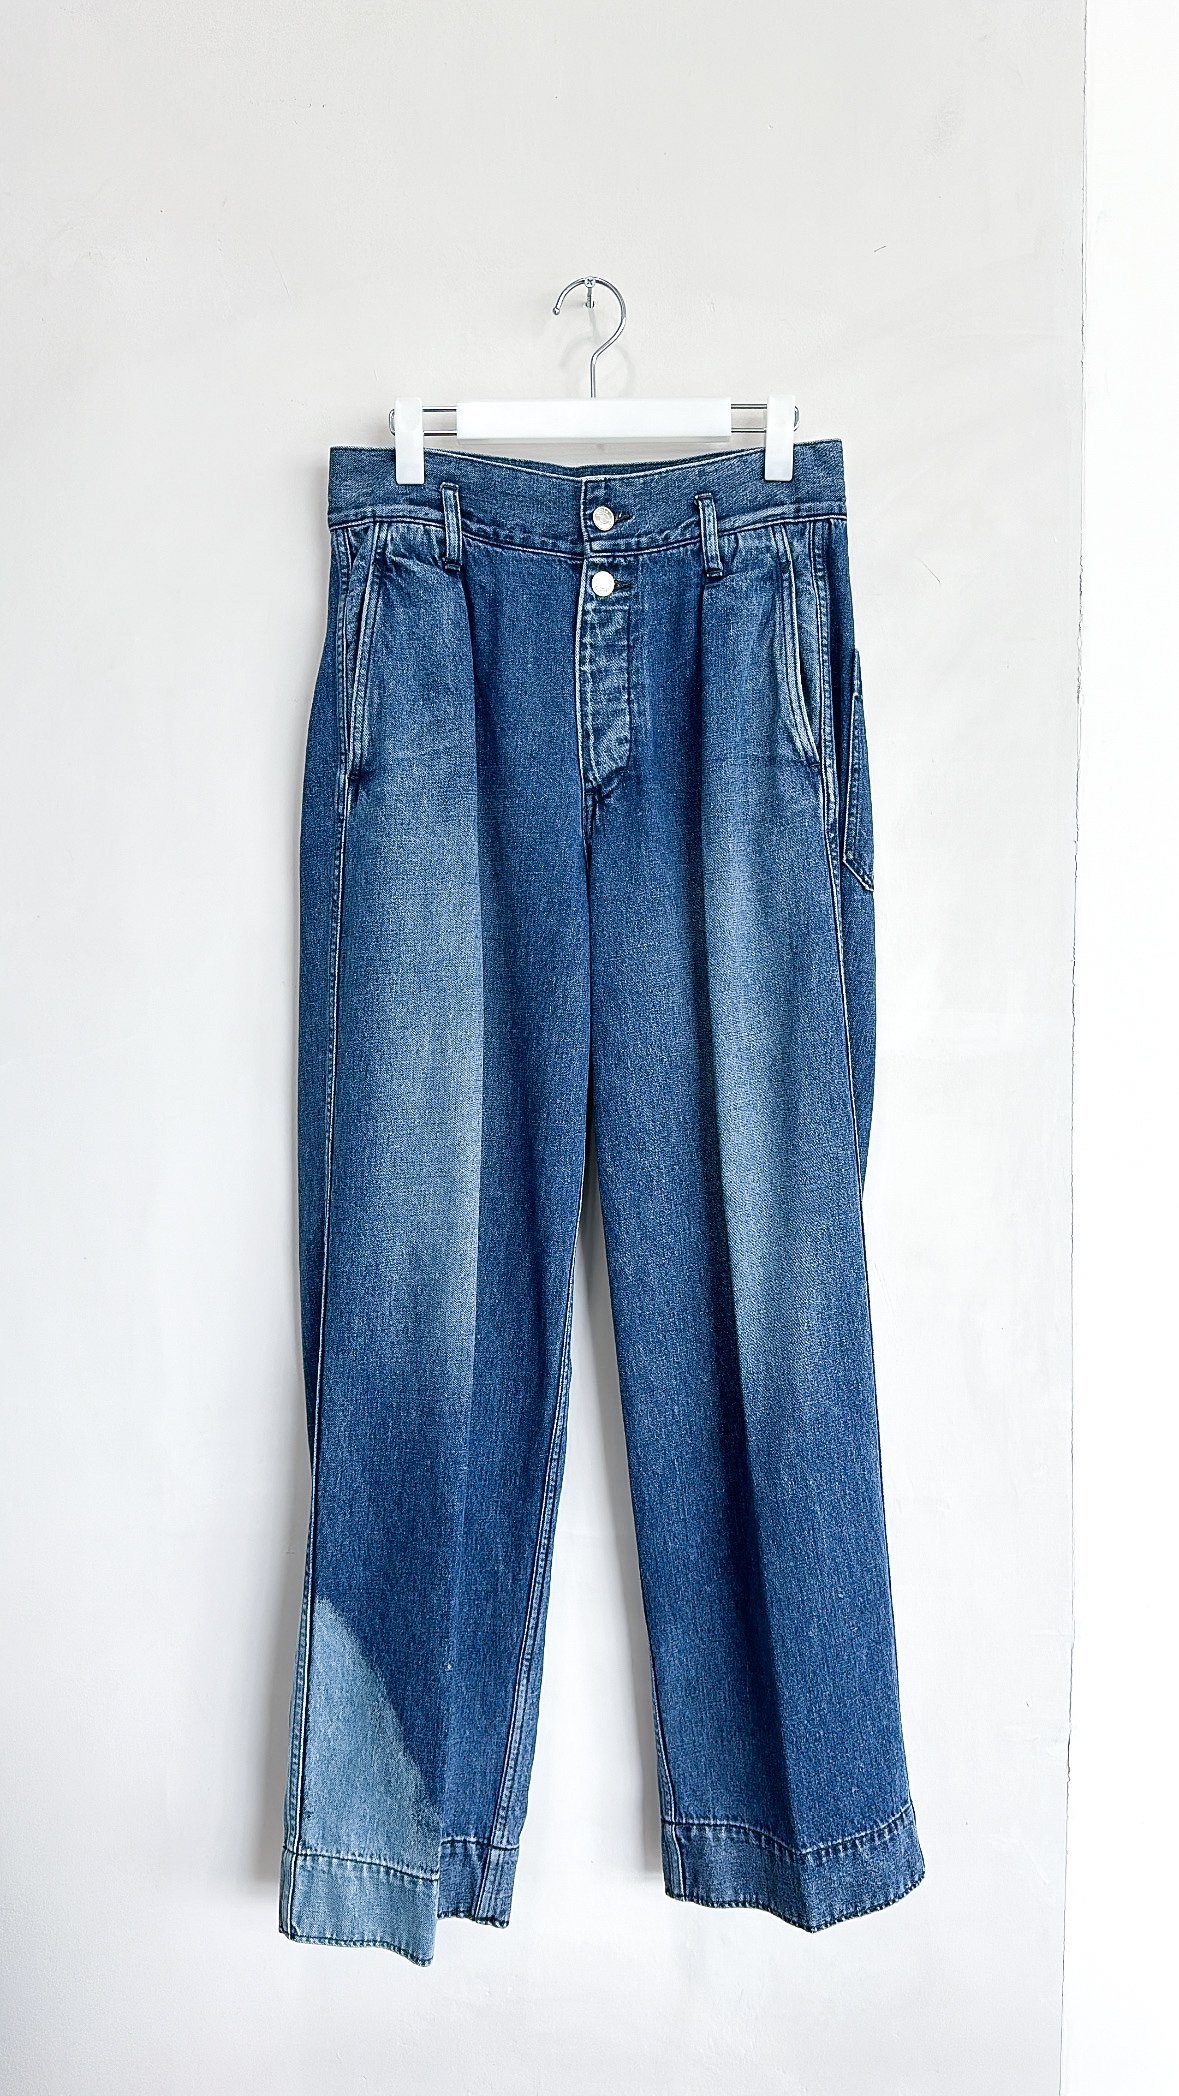 <img class='new_mark_img1' src='https://img.shop-pro.jp/img/new/icons47.gif' style='border:none;display:inline;margin:0px;padding:0px;width:auto;' />THE WIDE JEAN TROUSERS